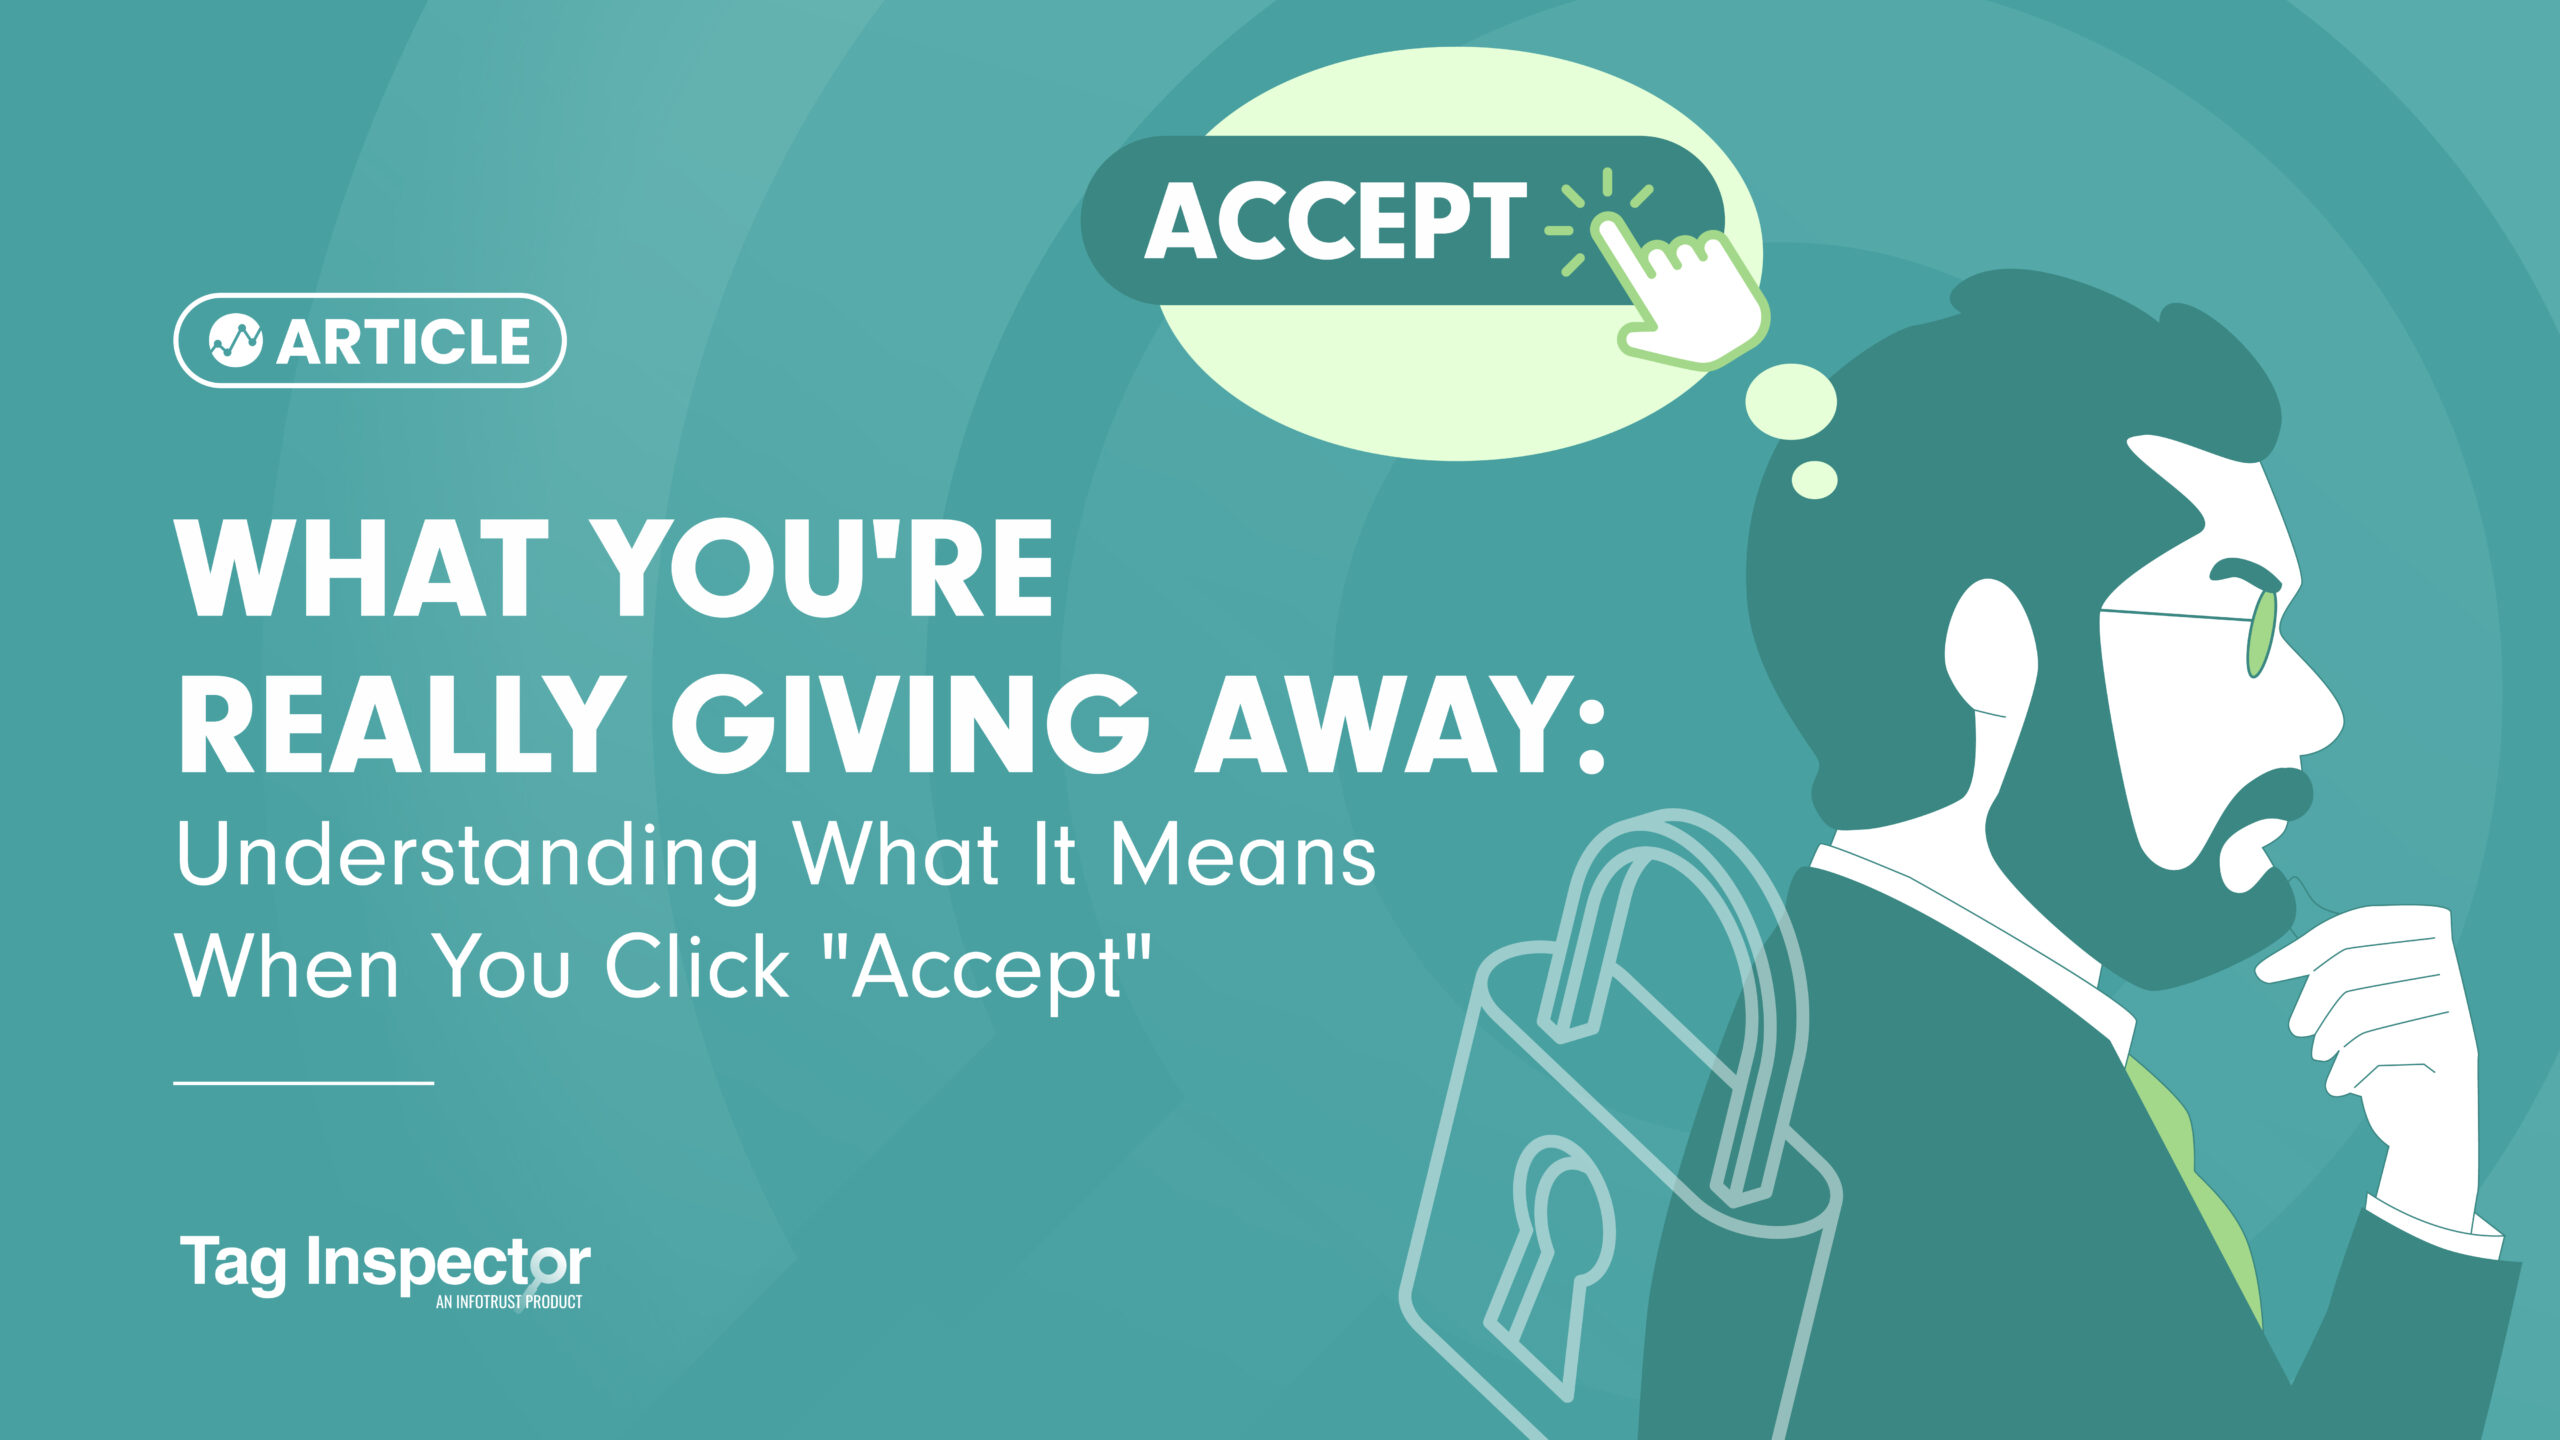 What You're Really Giving Away: Understanding What It Means When You Click "Accept"